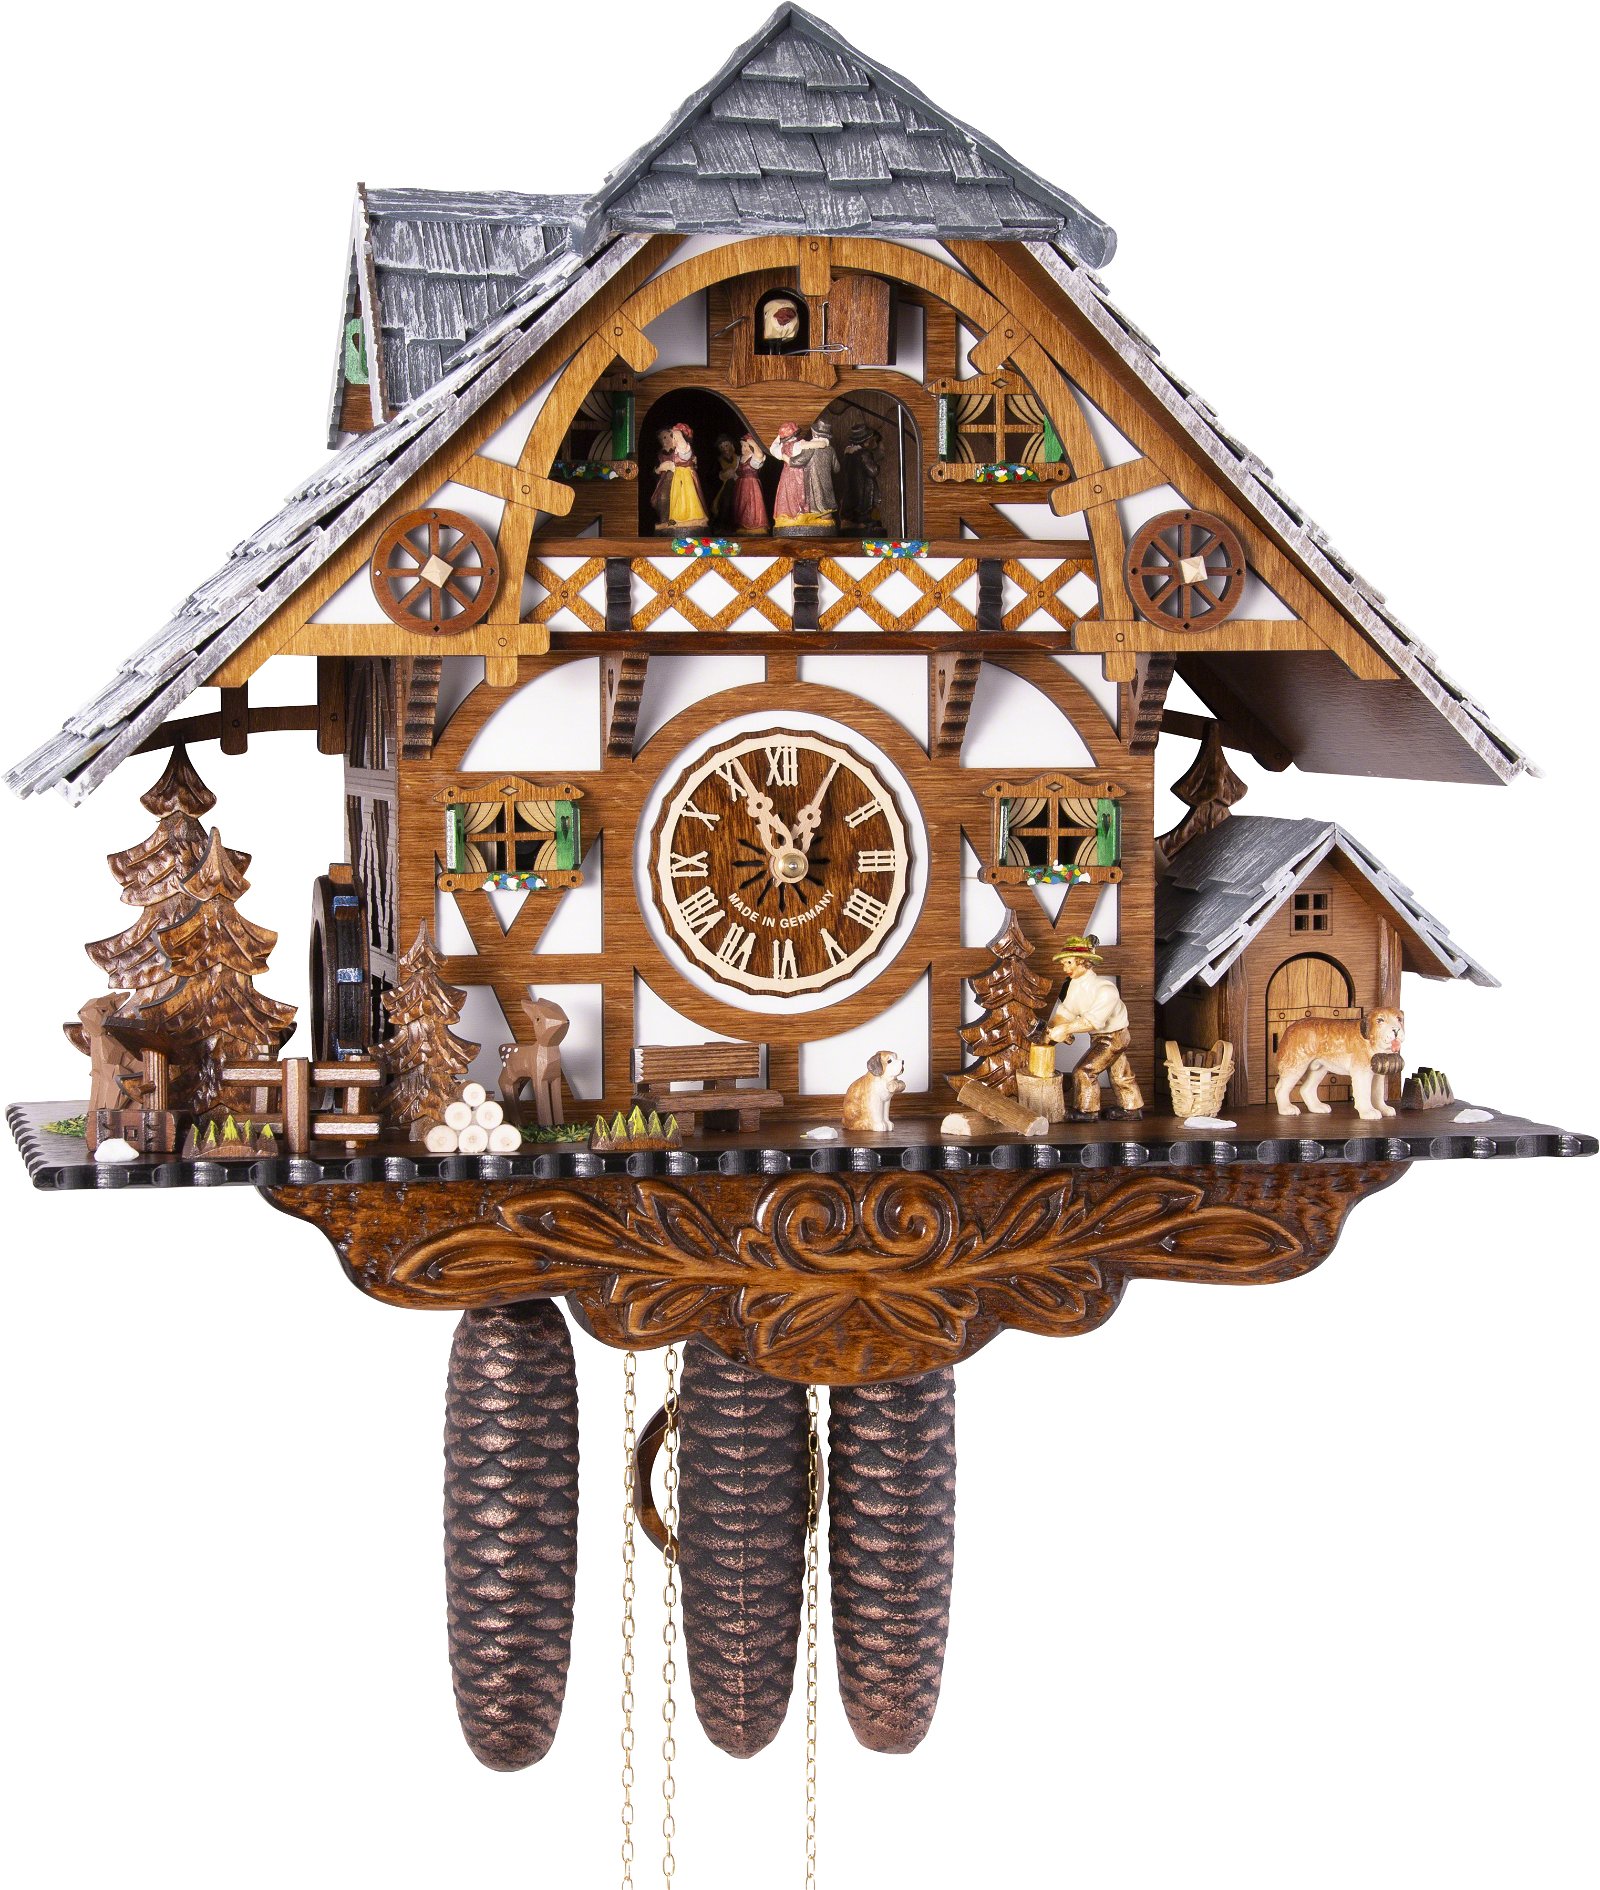 Cuckoo Clock 8-day-movement Chalet-Style 43cm by Engstler